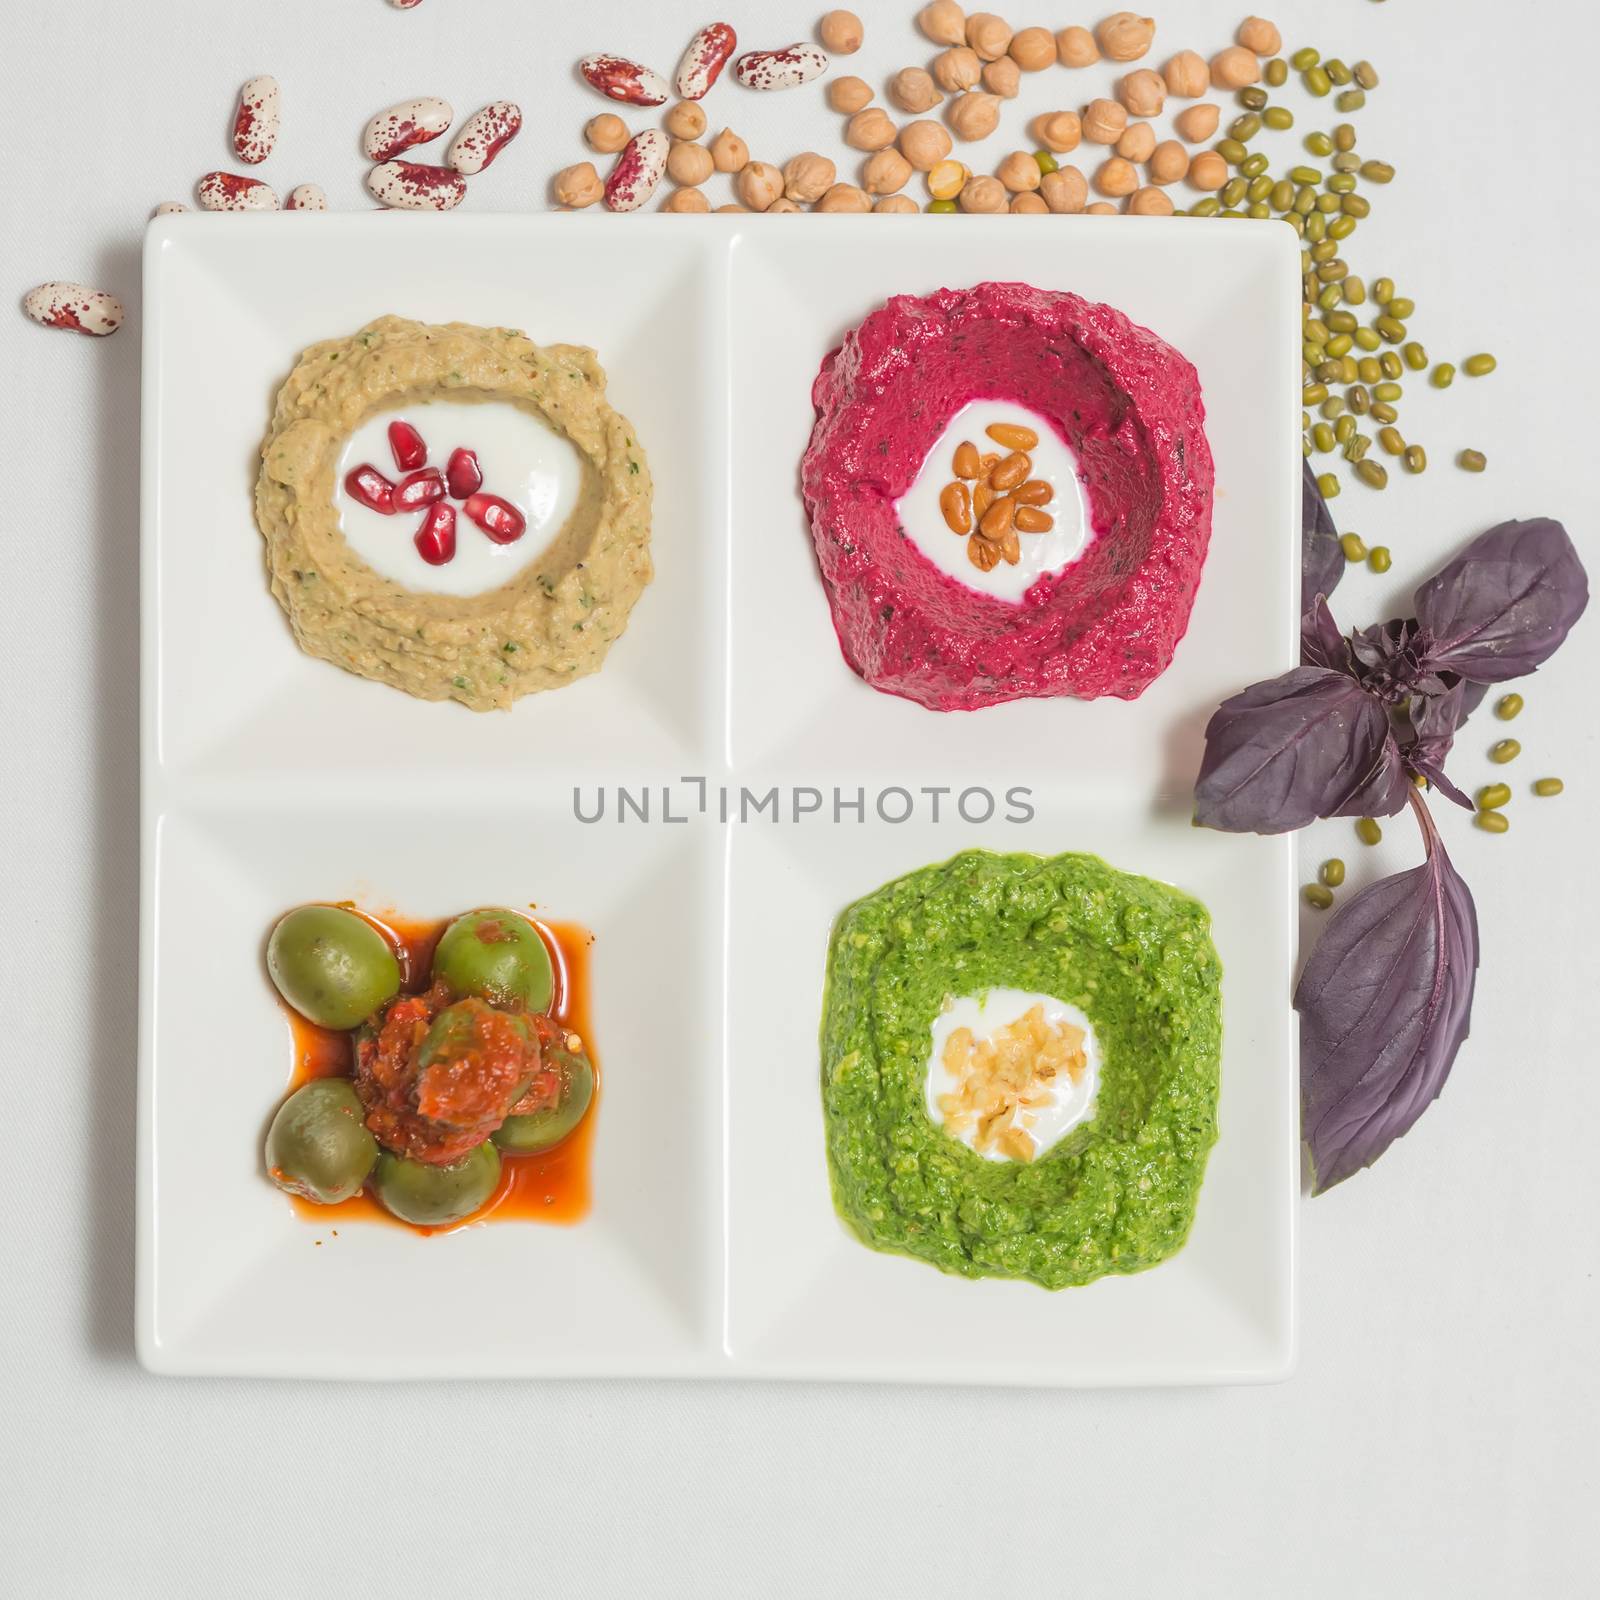 Delicious and healthy hummus set in white pate.